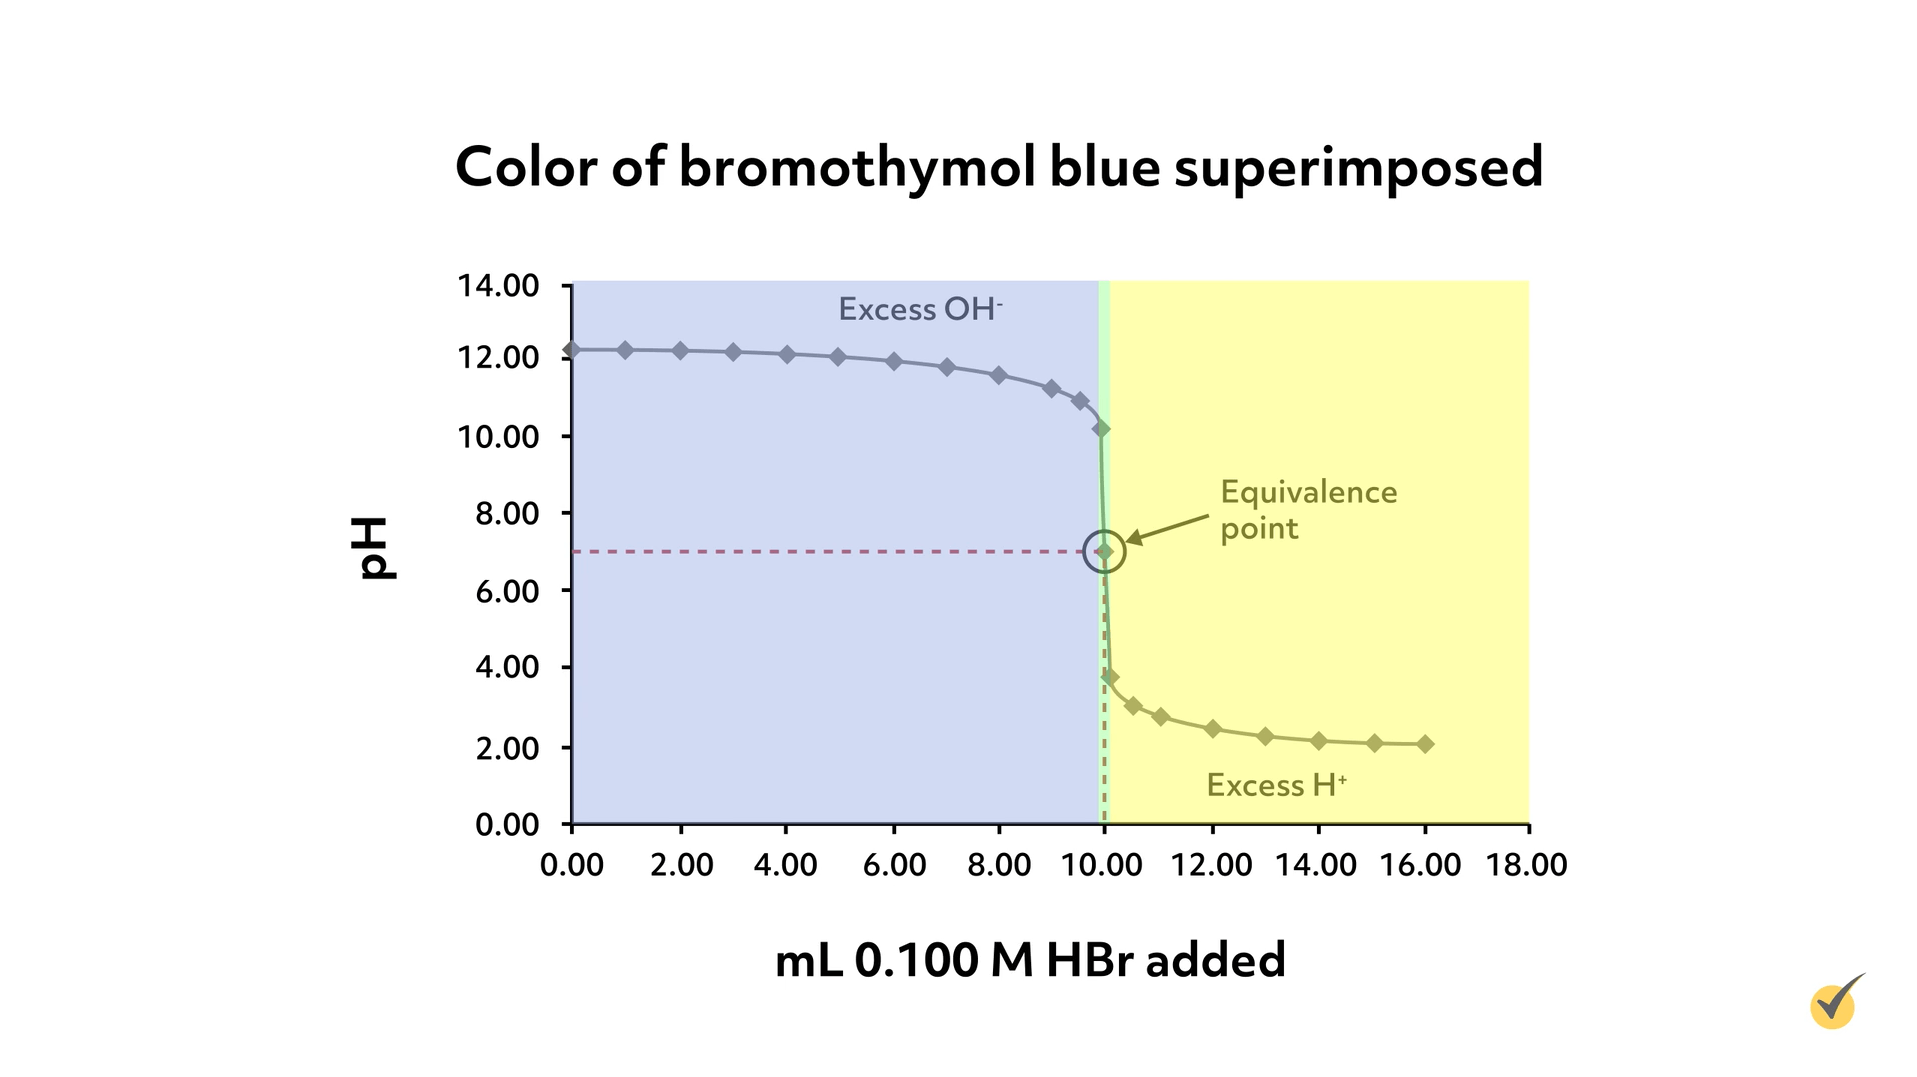 Image of graph showing the color of bromothymol blue superimposed. The PH drops considerably from 12.00 to 2.00